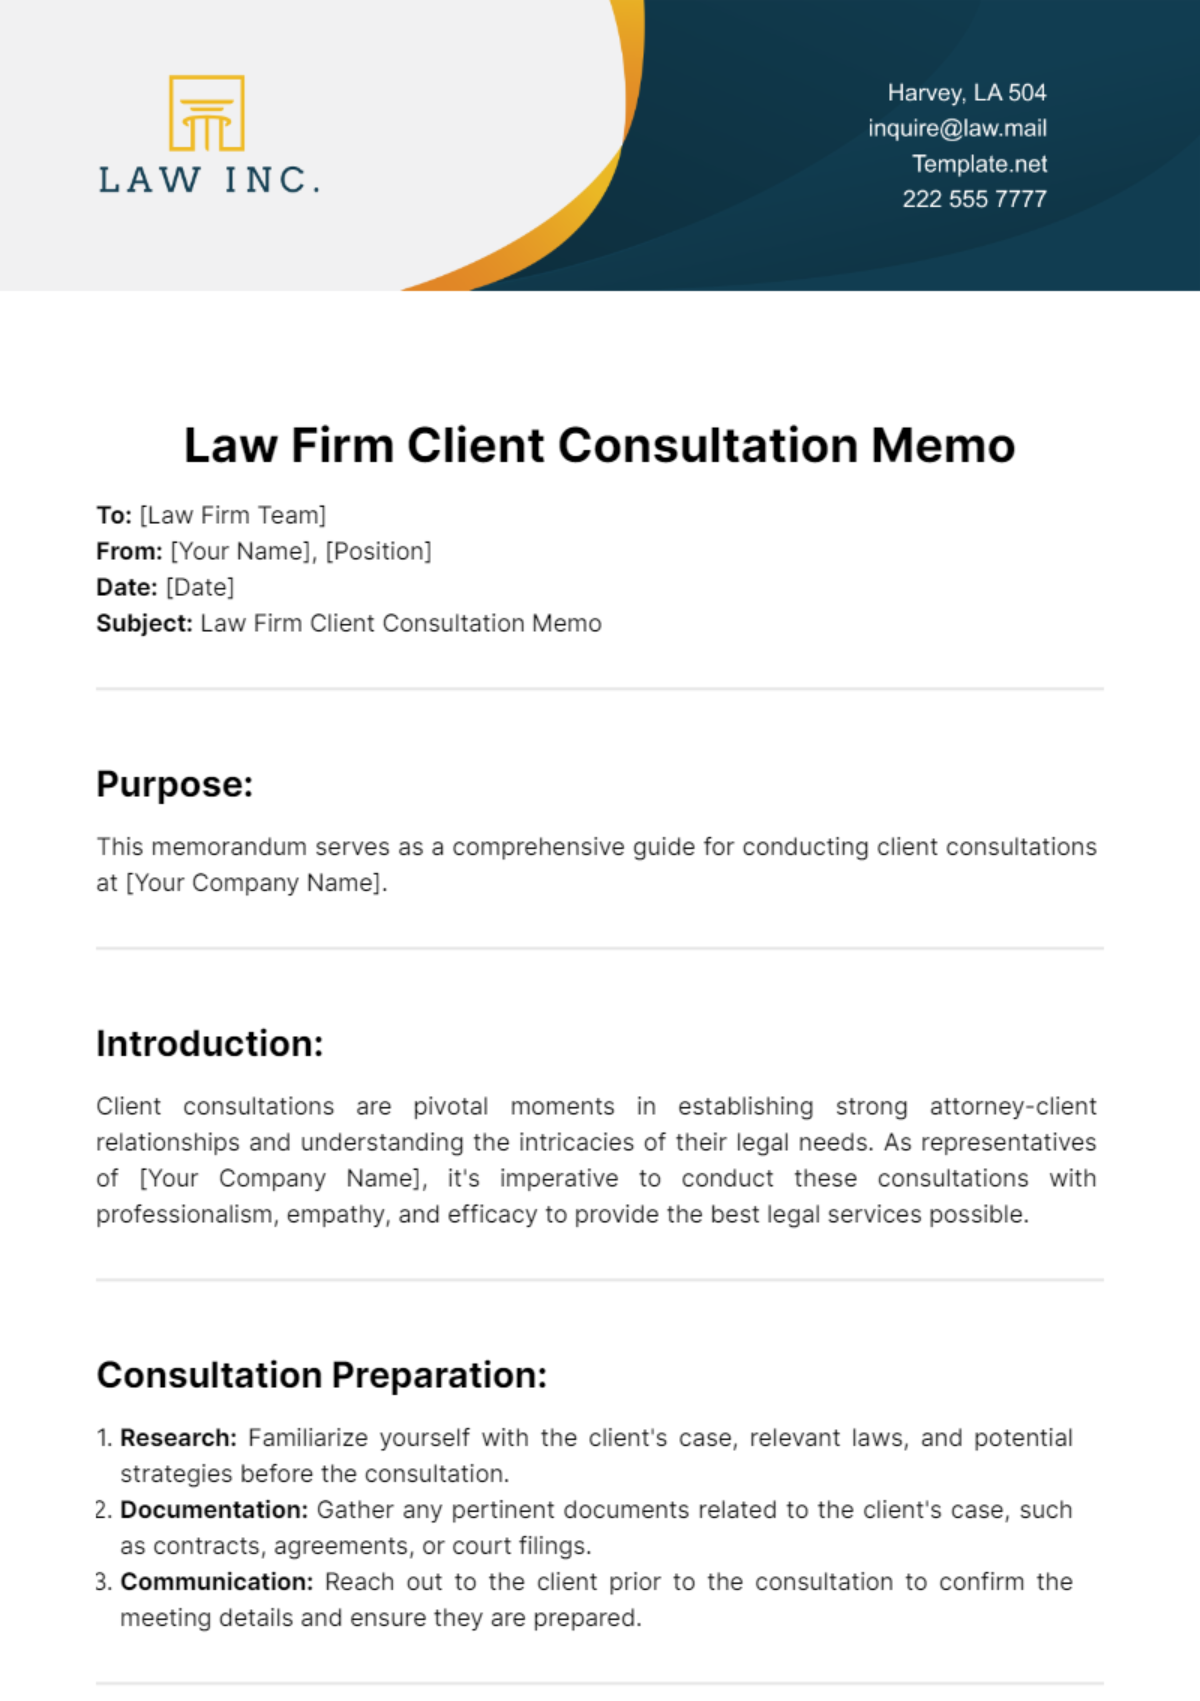 Free Law Firm Client Consultation Memo Template